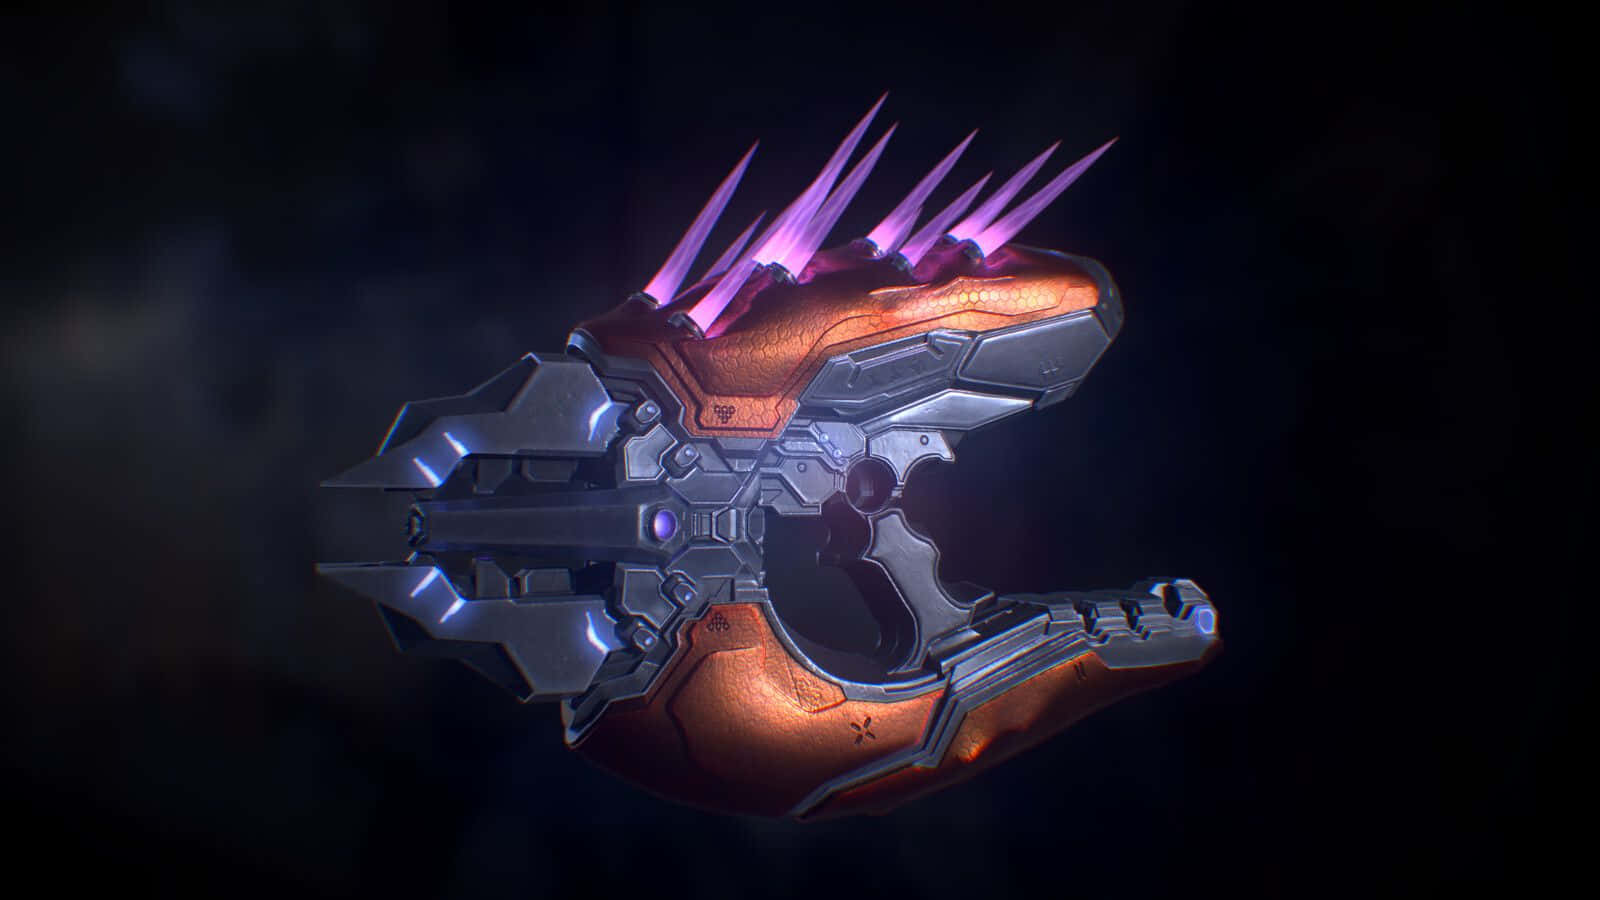 Intense Combat Scene with a Halo Needler Weapon Wallpaper